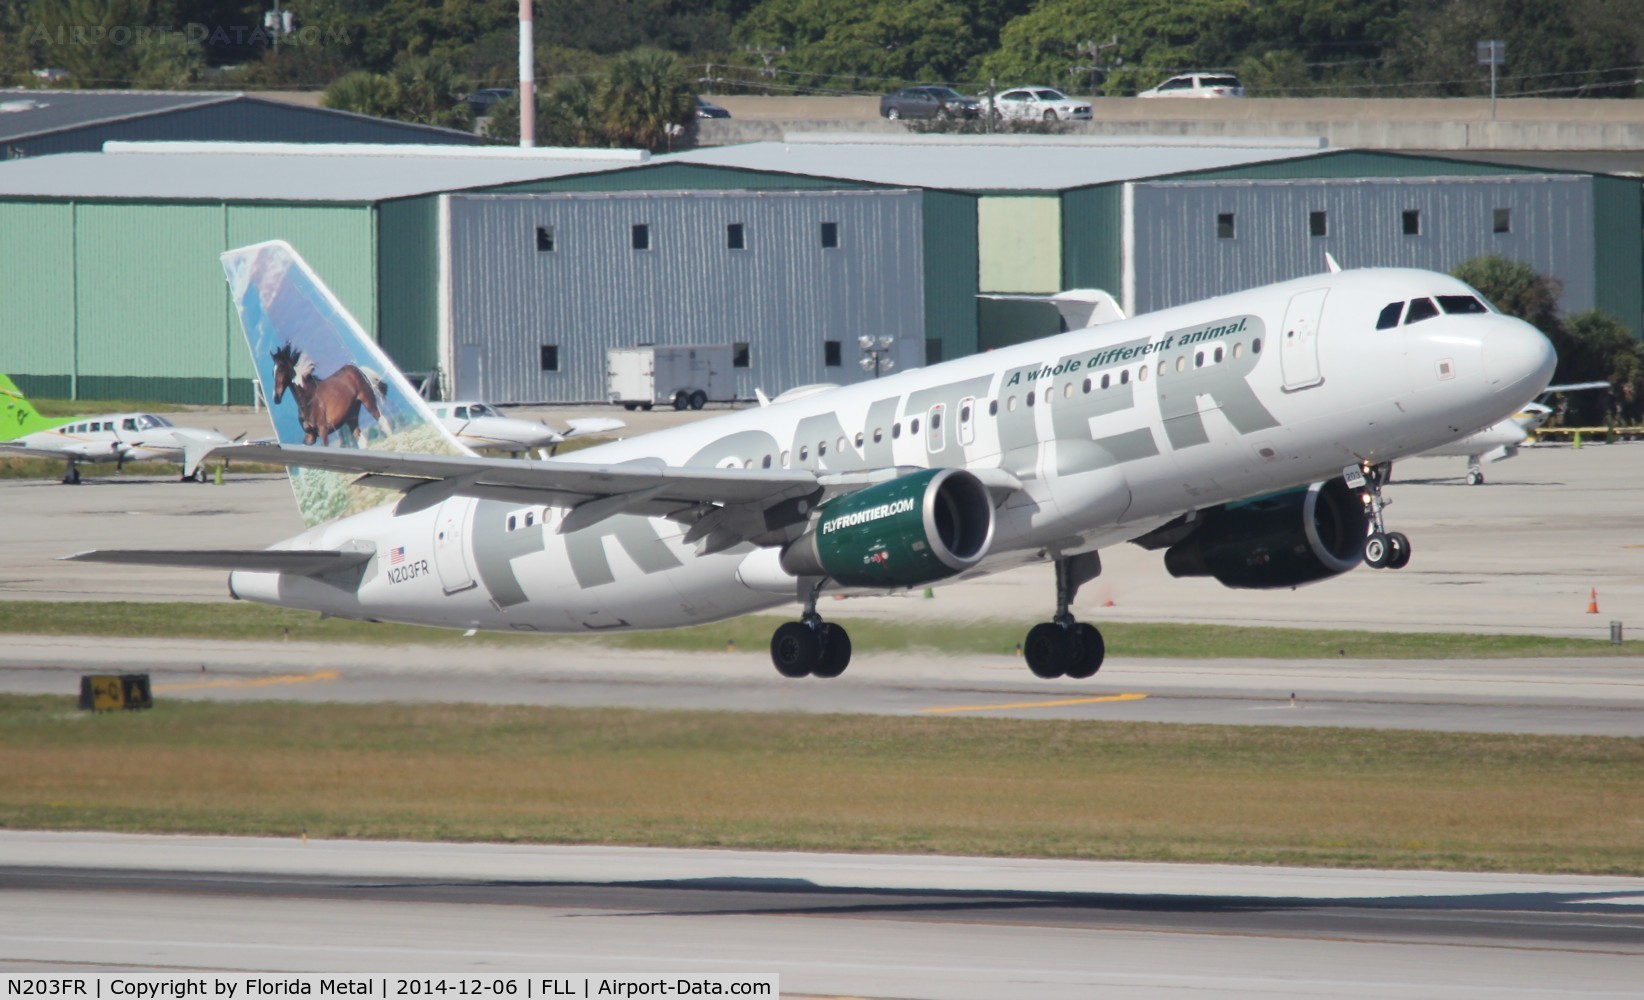 N203FR, 2002 Airbus A320-214 C/N 1806, Frontier A320 Sally the Mustang